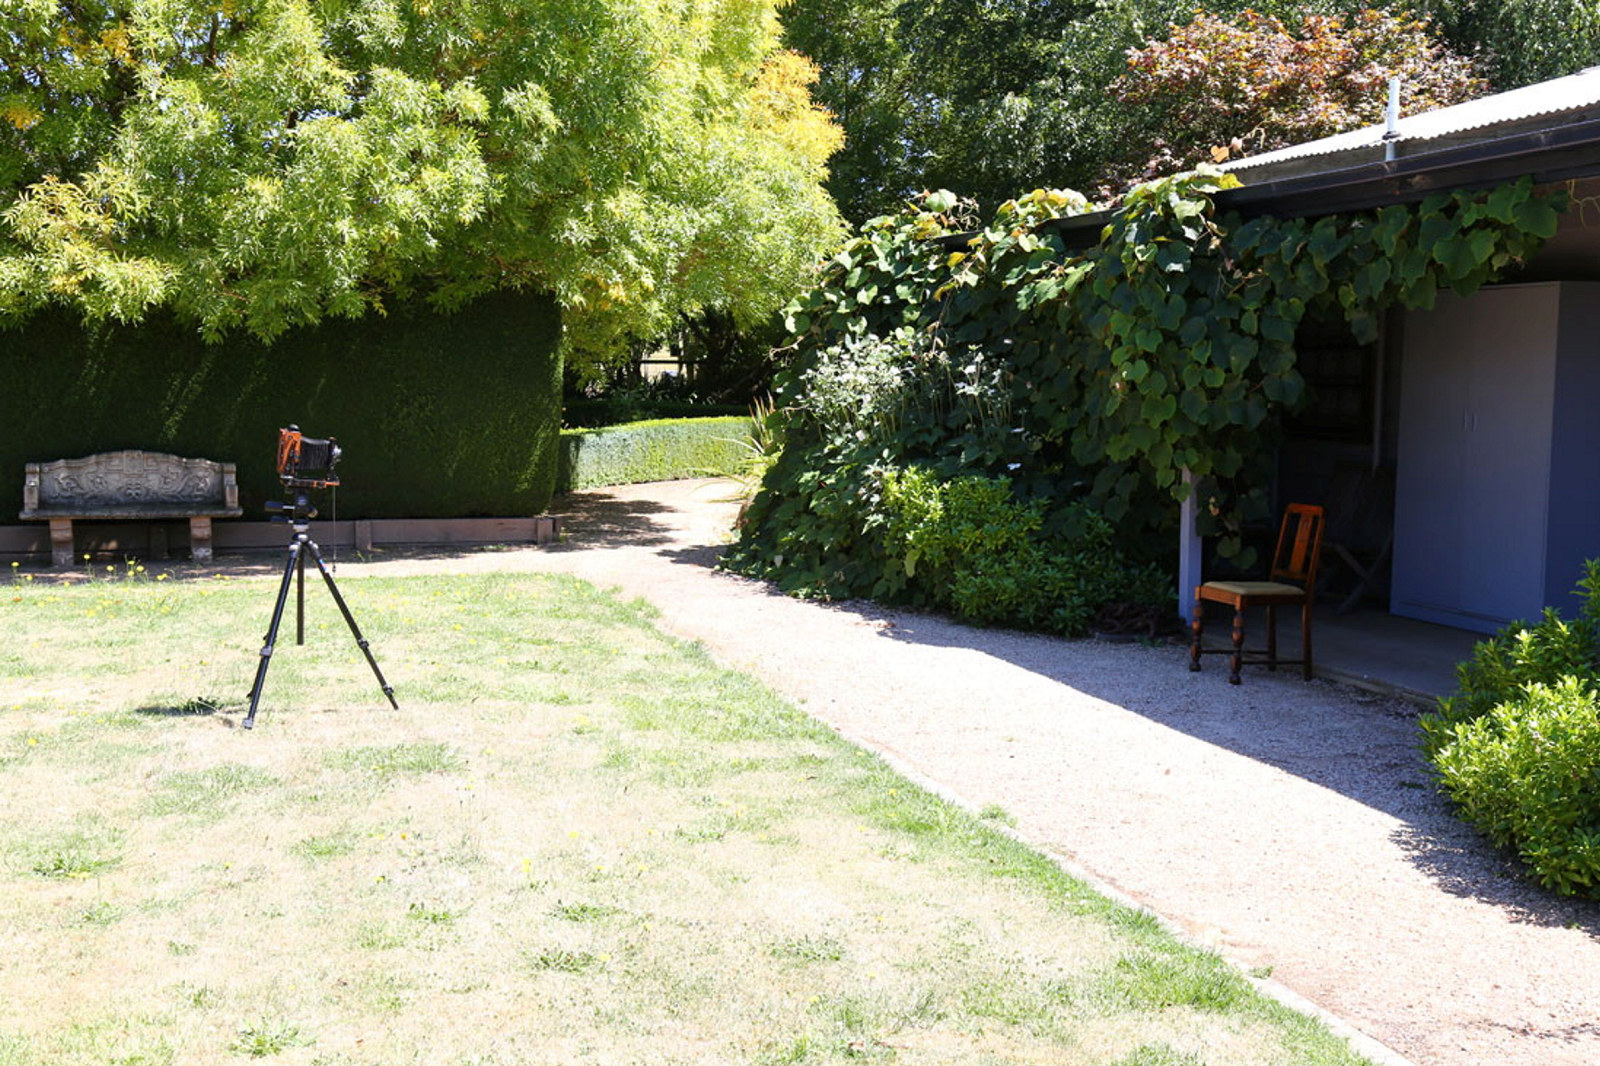 View of camera set up in garden.